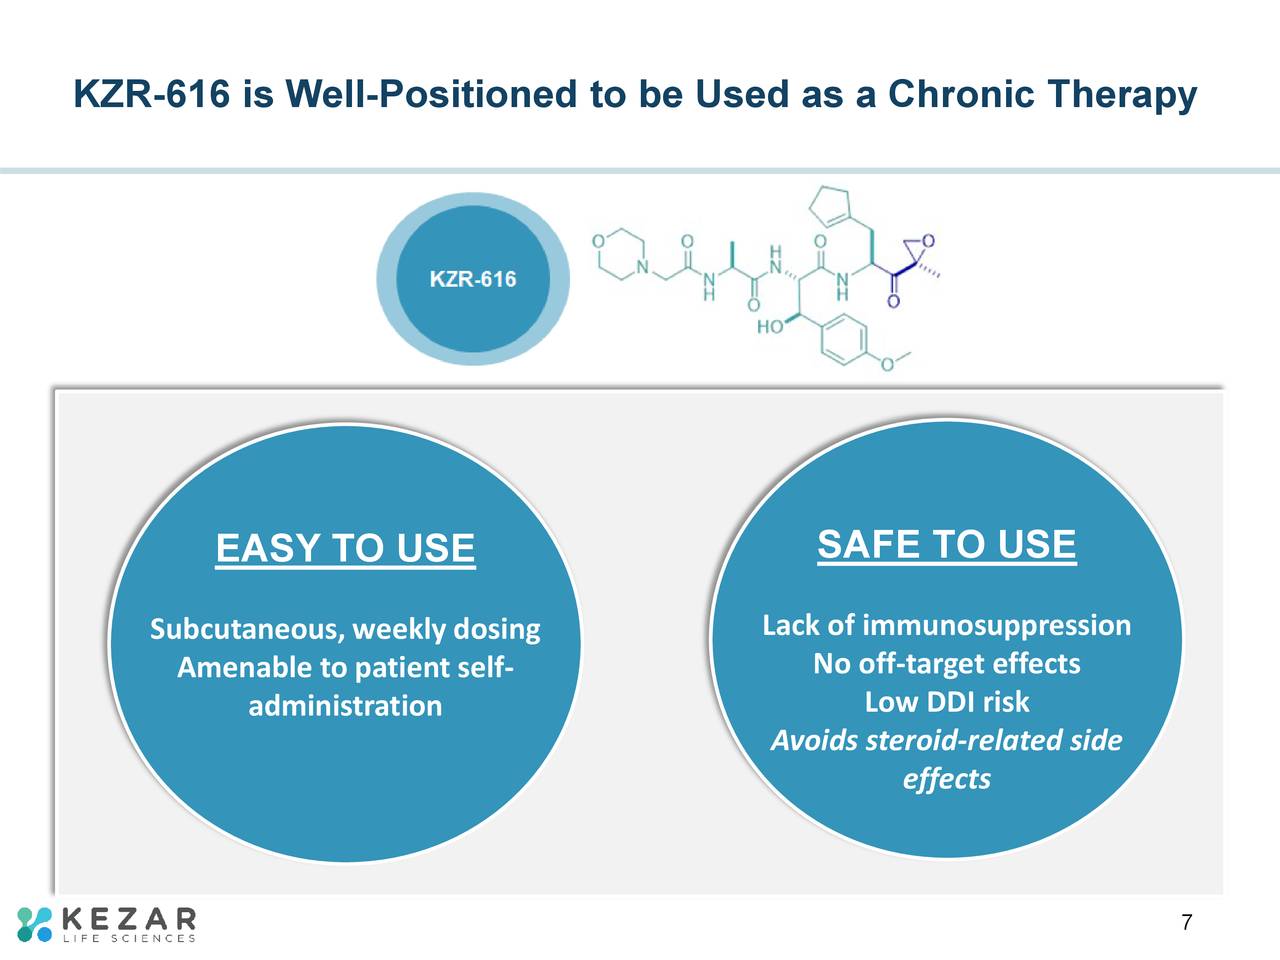 KZR-616 is Well-Positioned to be Used as a Chronic Therapy